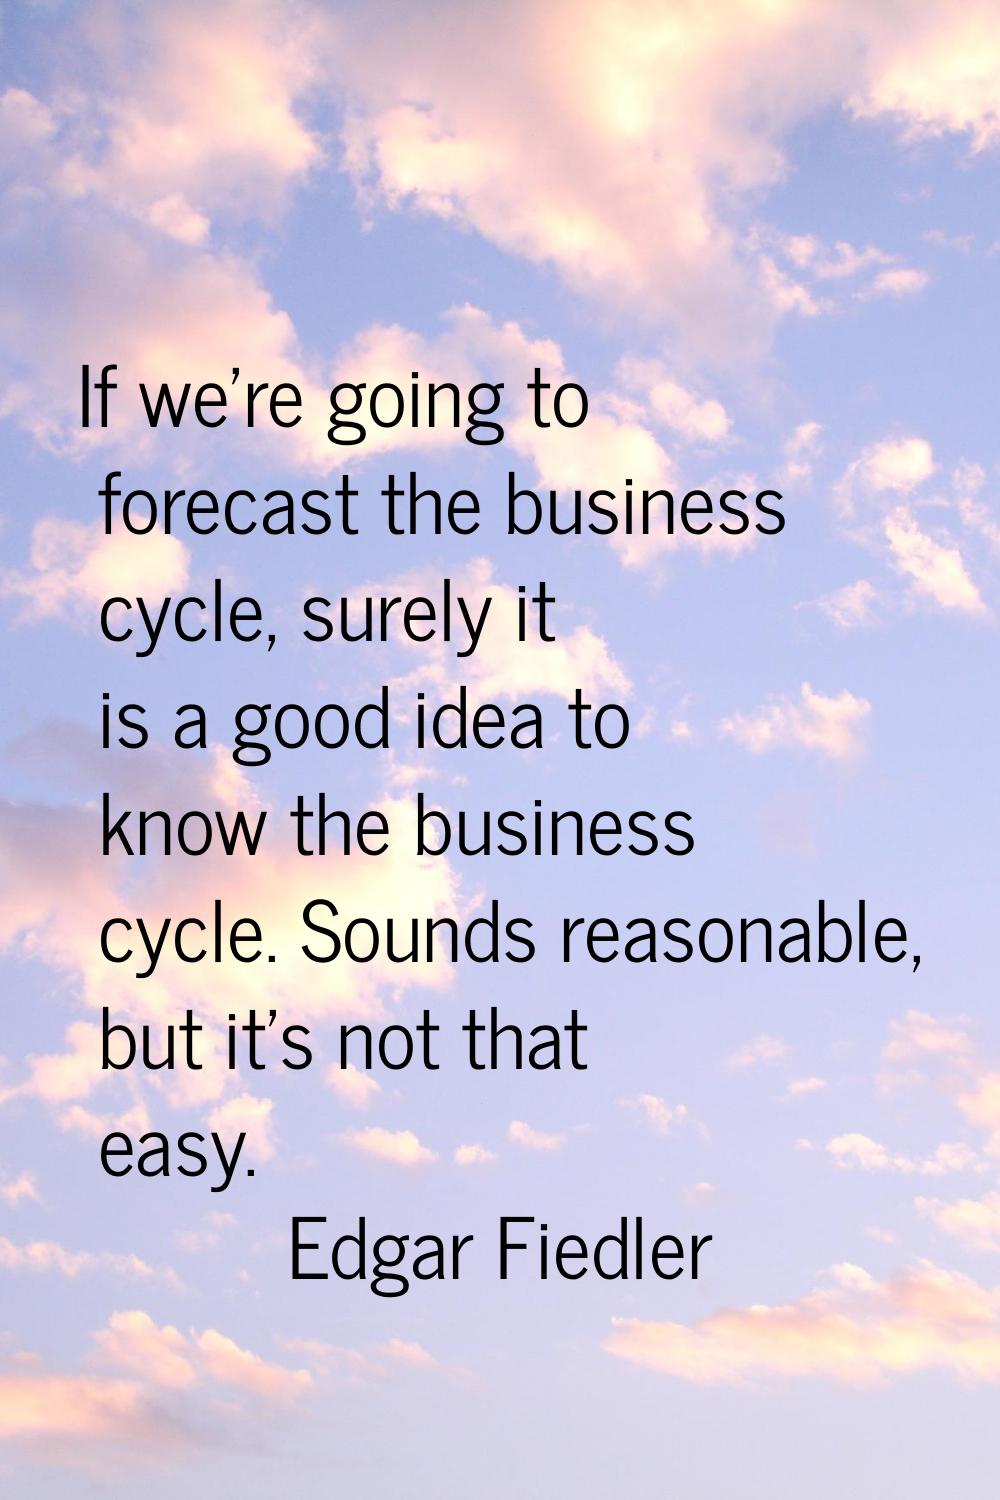 If we're going to forecast the business cycle, surely it is a good idea to know the business cycle.